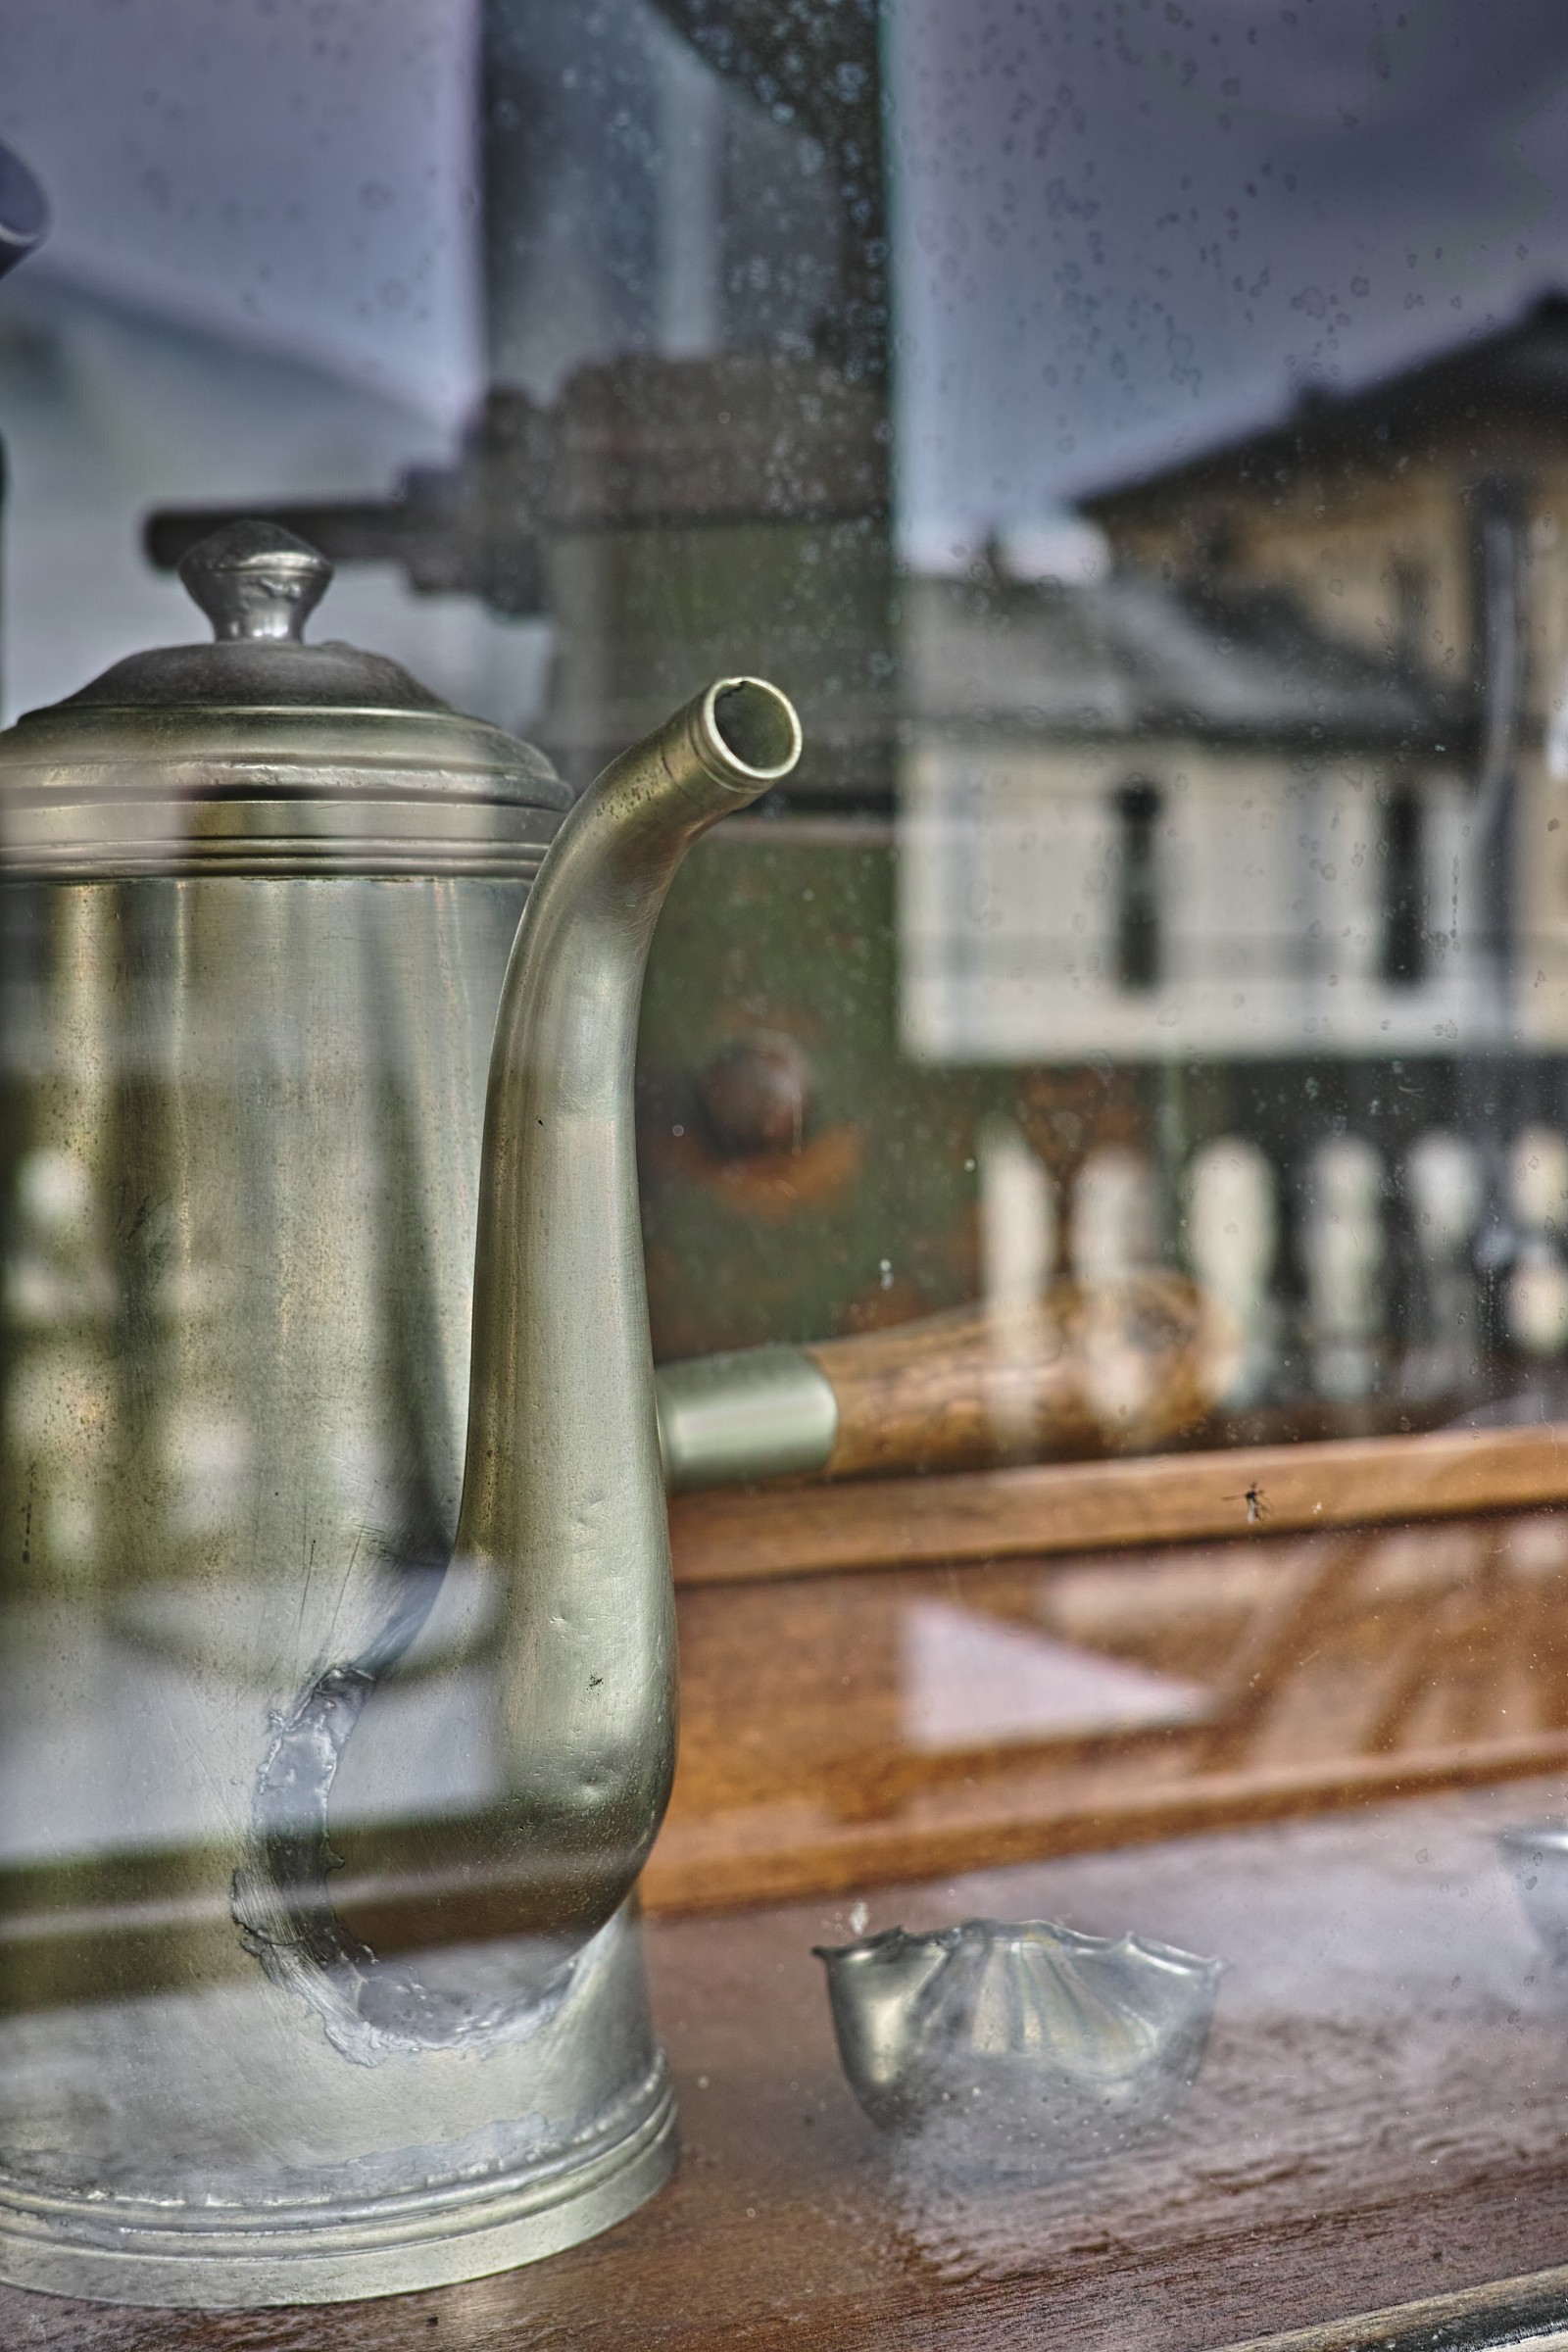 Reflections in carafe ......